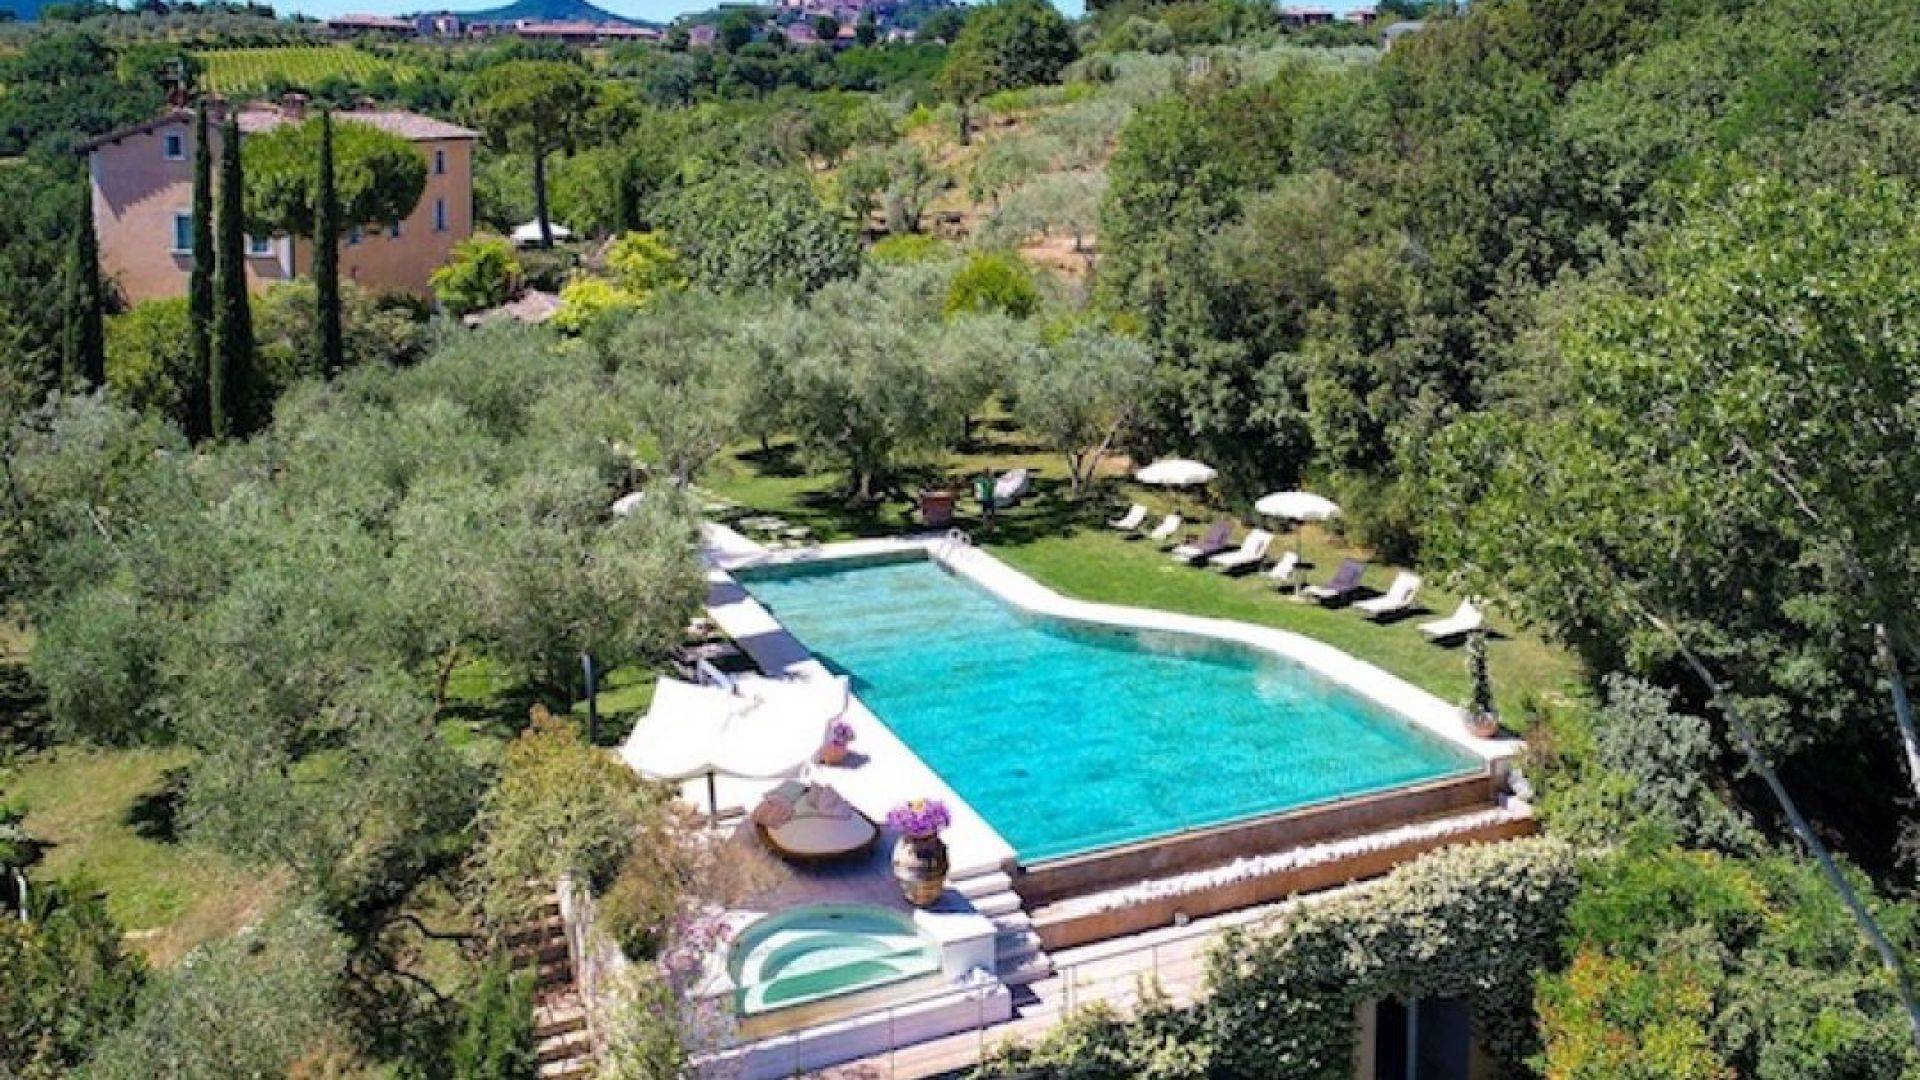 Dating back to 1500, this wonderful, luxury manor house with land and swimming pool is for sale in a hillside position.